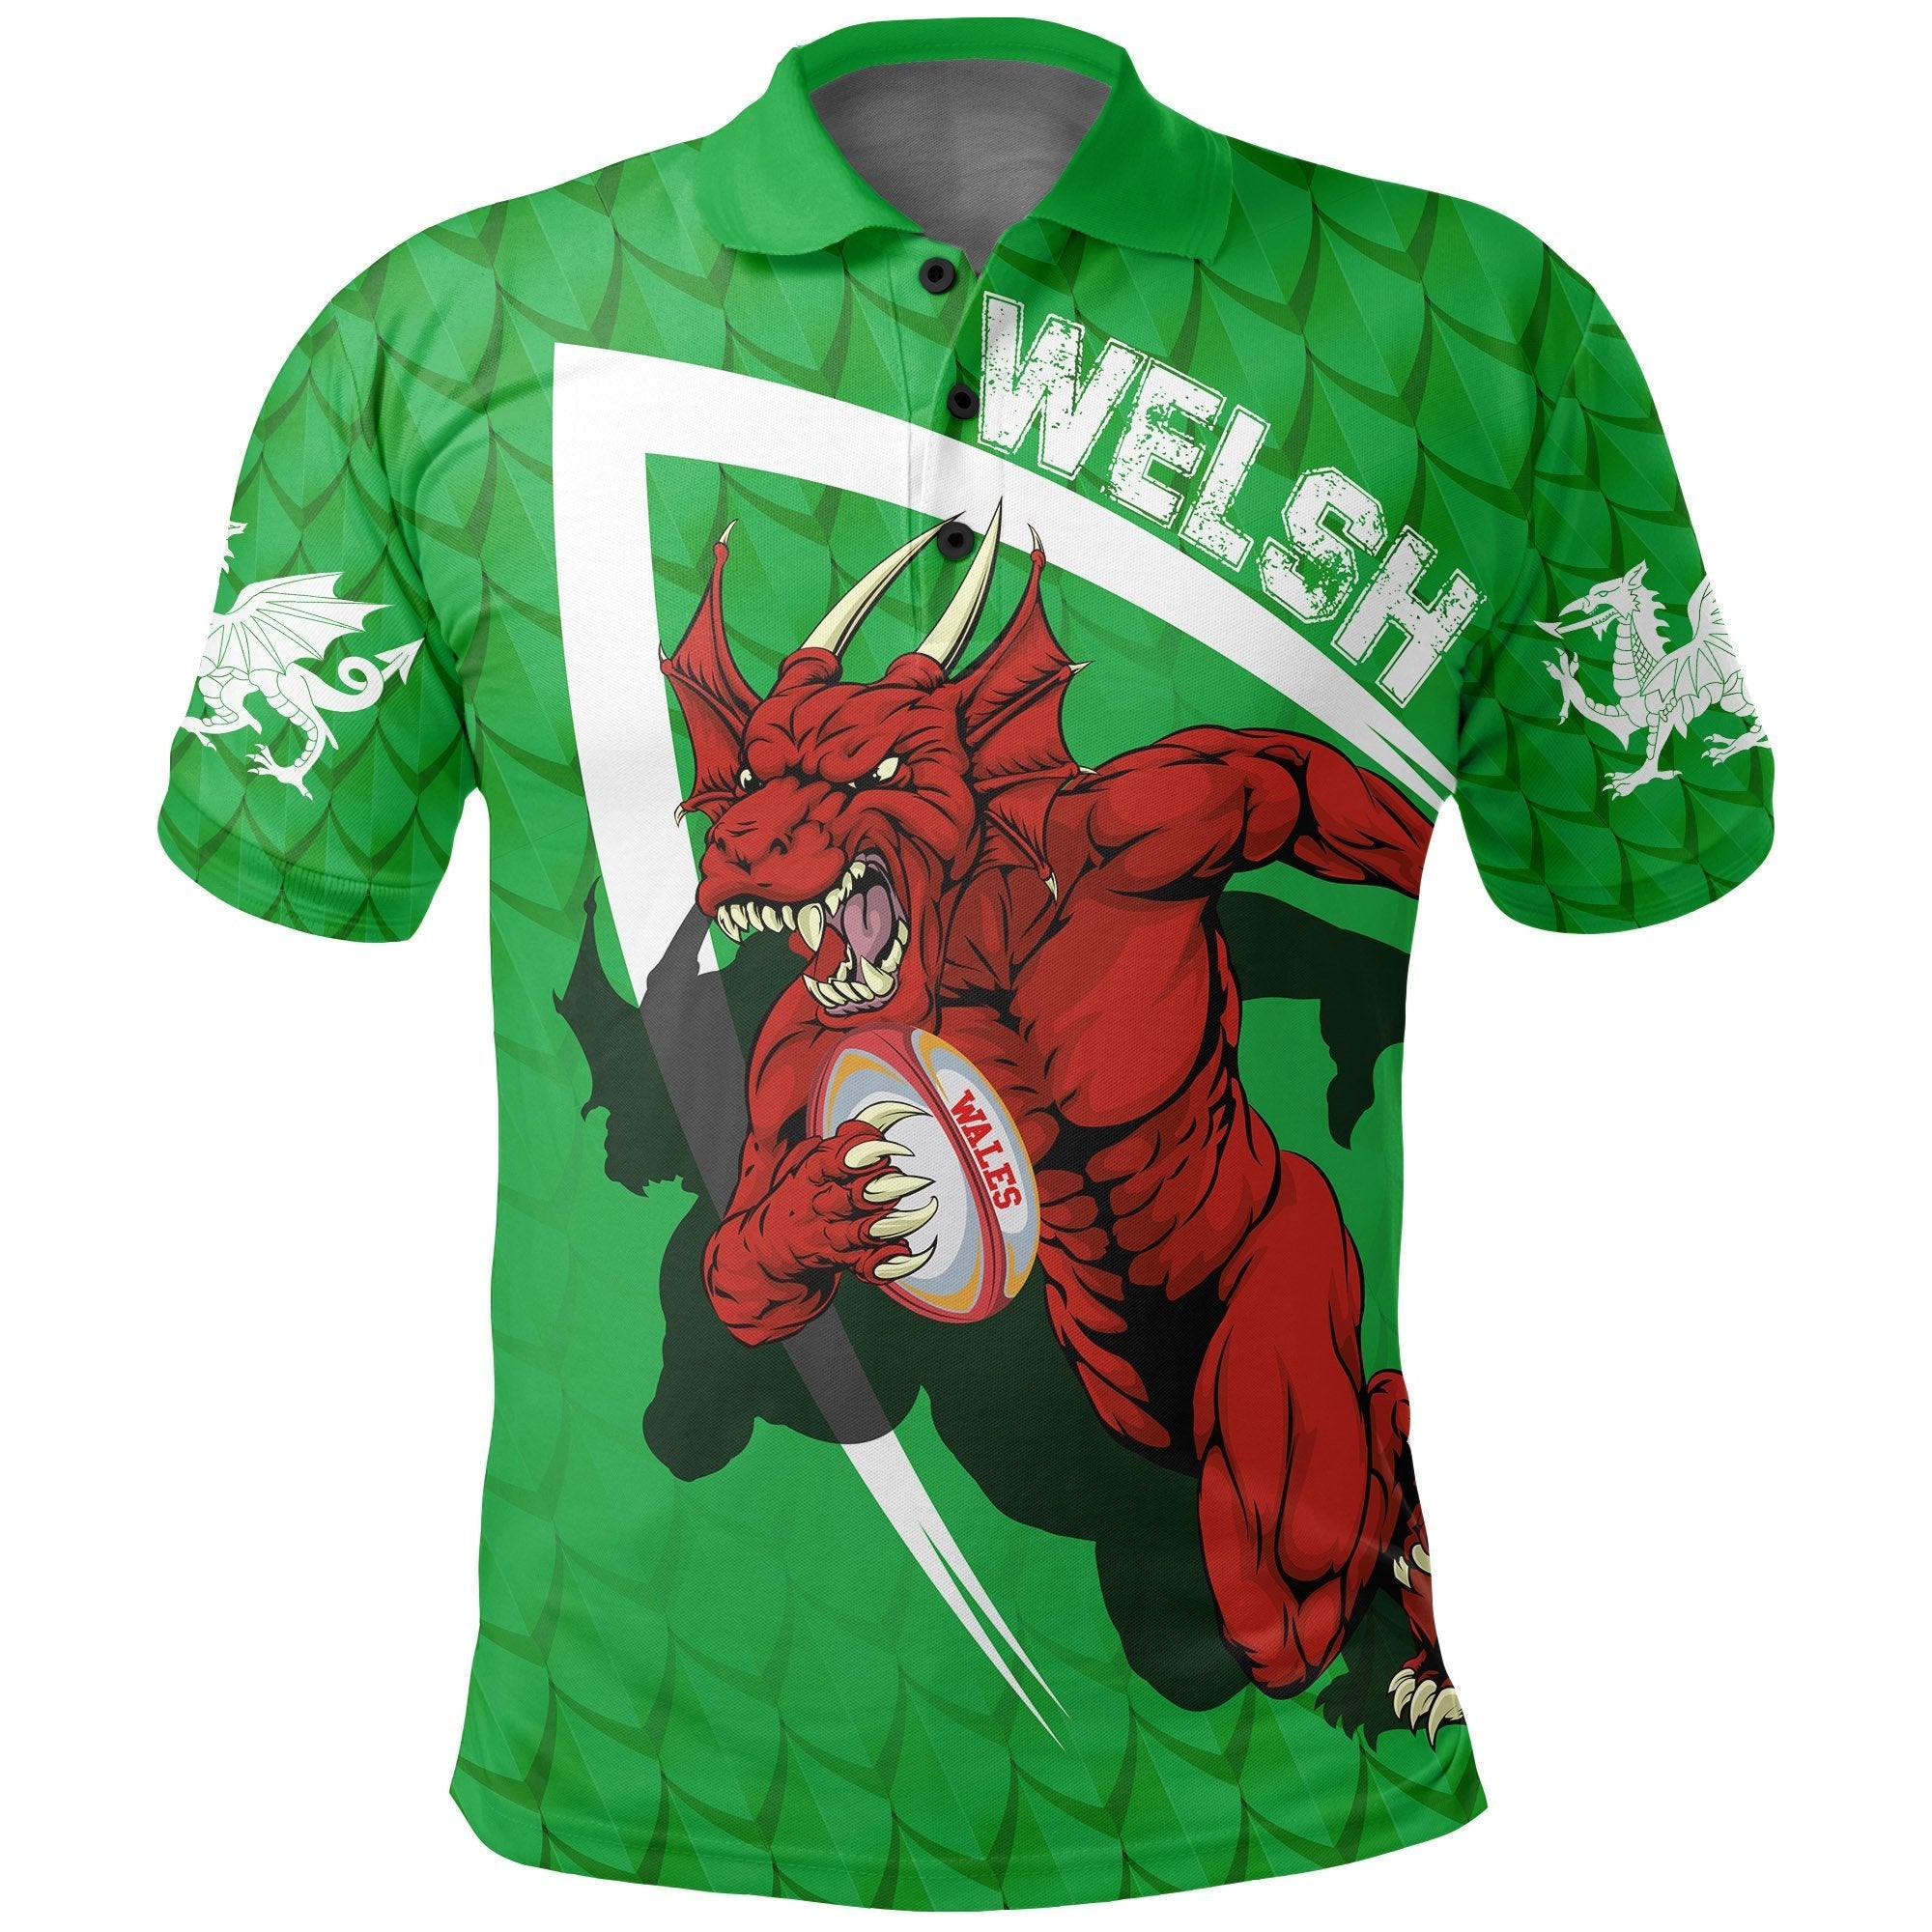 wales-polo-shirt-welsh-dragon-rugby-champion